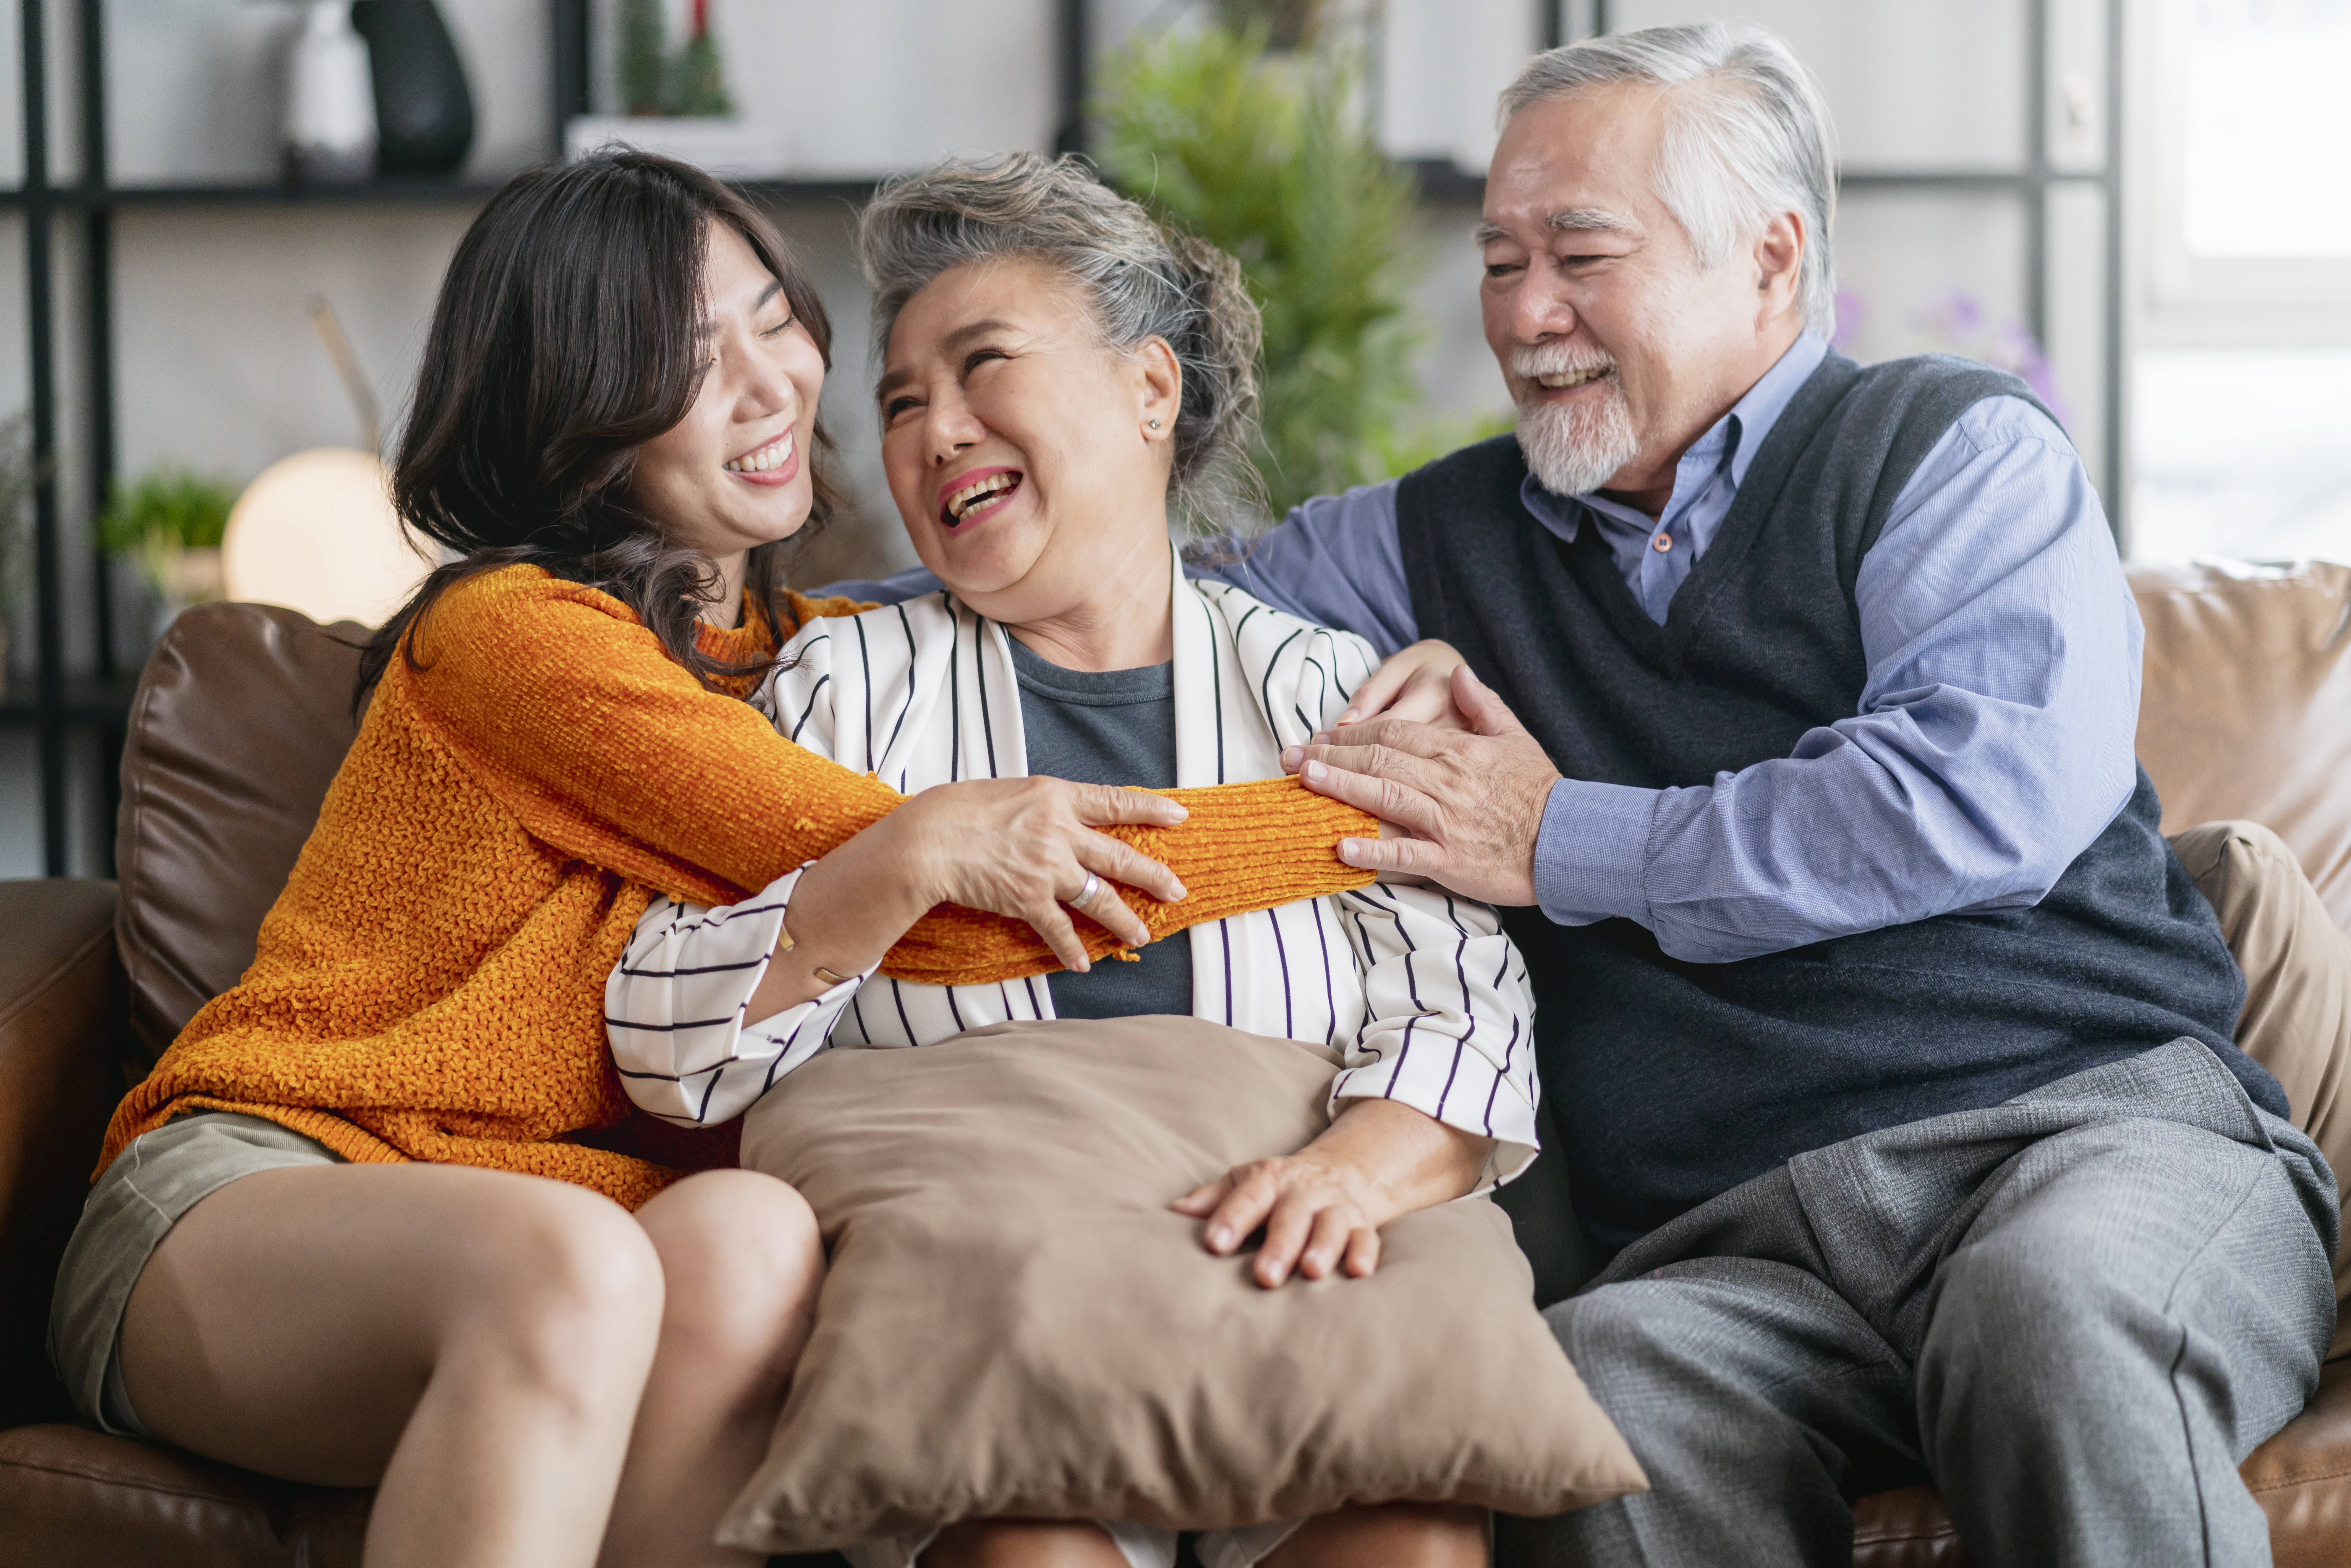 happiness-asian-family-candid-daughter-hug-grandparent-mother-farther-senior-elder-cozy-relax-sofa-couch-surprise-visiting-living-room-hometogether-hug-cheerful-asian-family-home